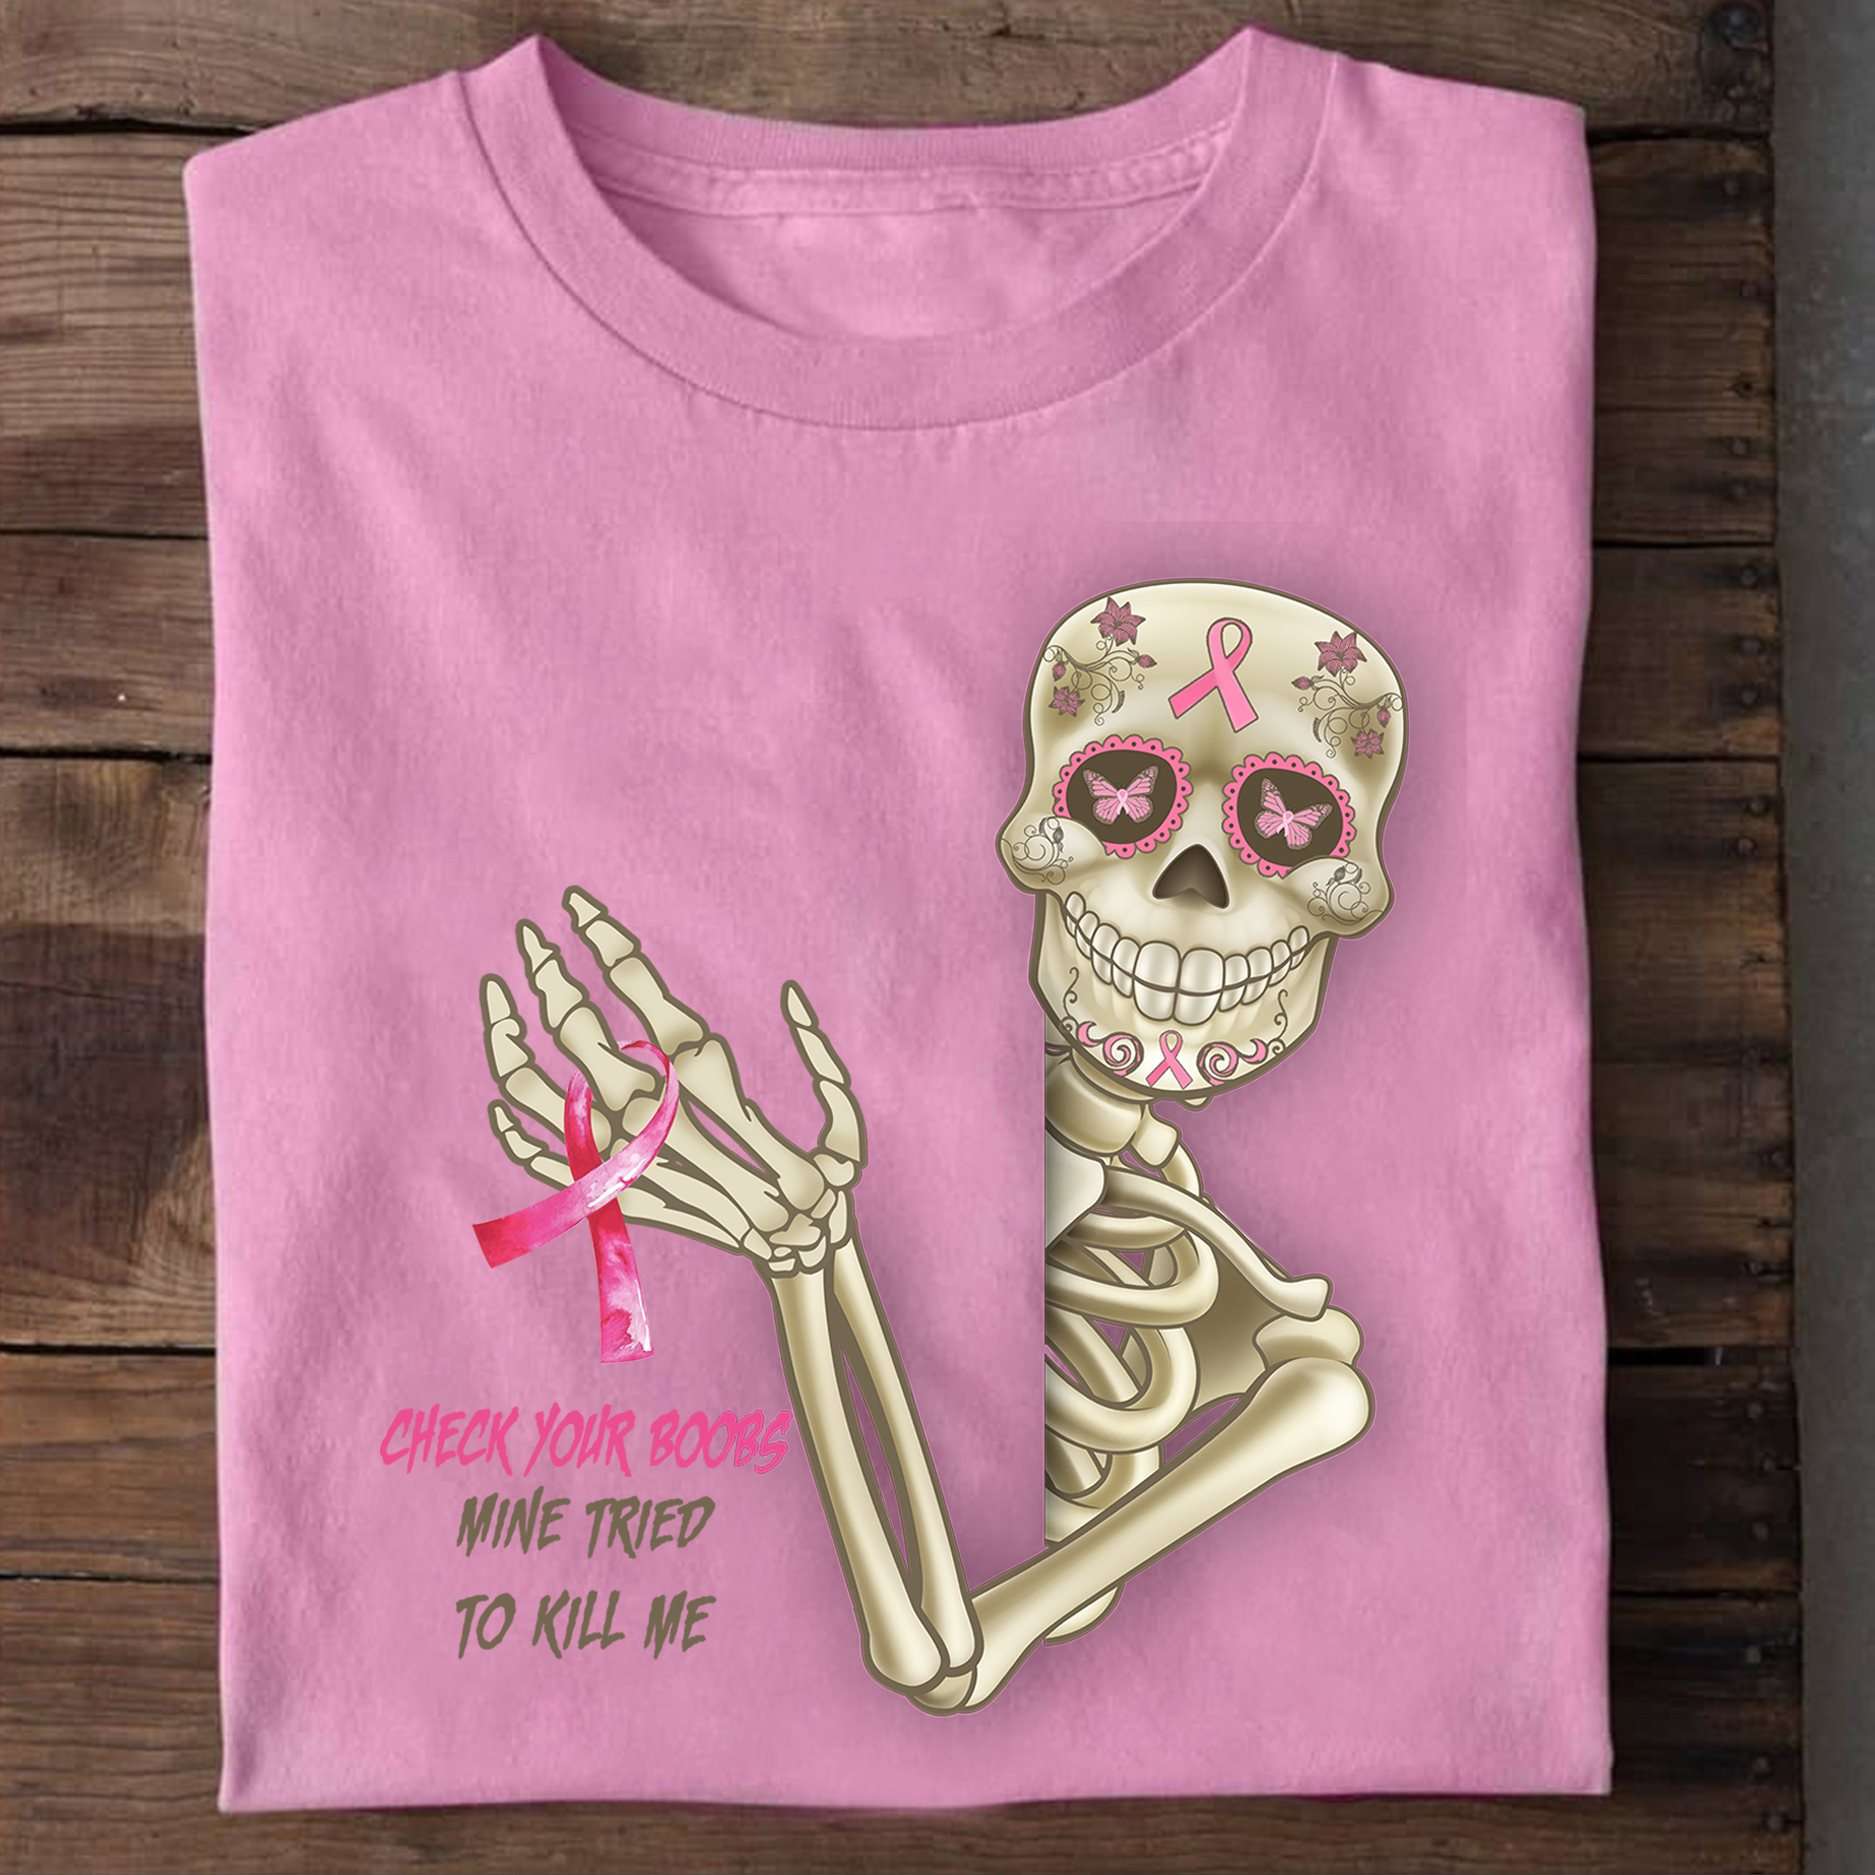 Check your boobs, mine tried to kill me - Skull ribbon, breast cancer awareness